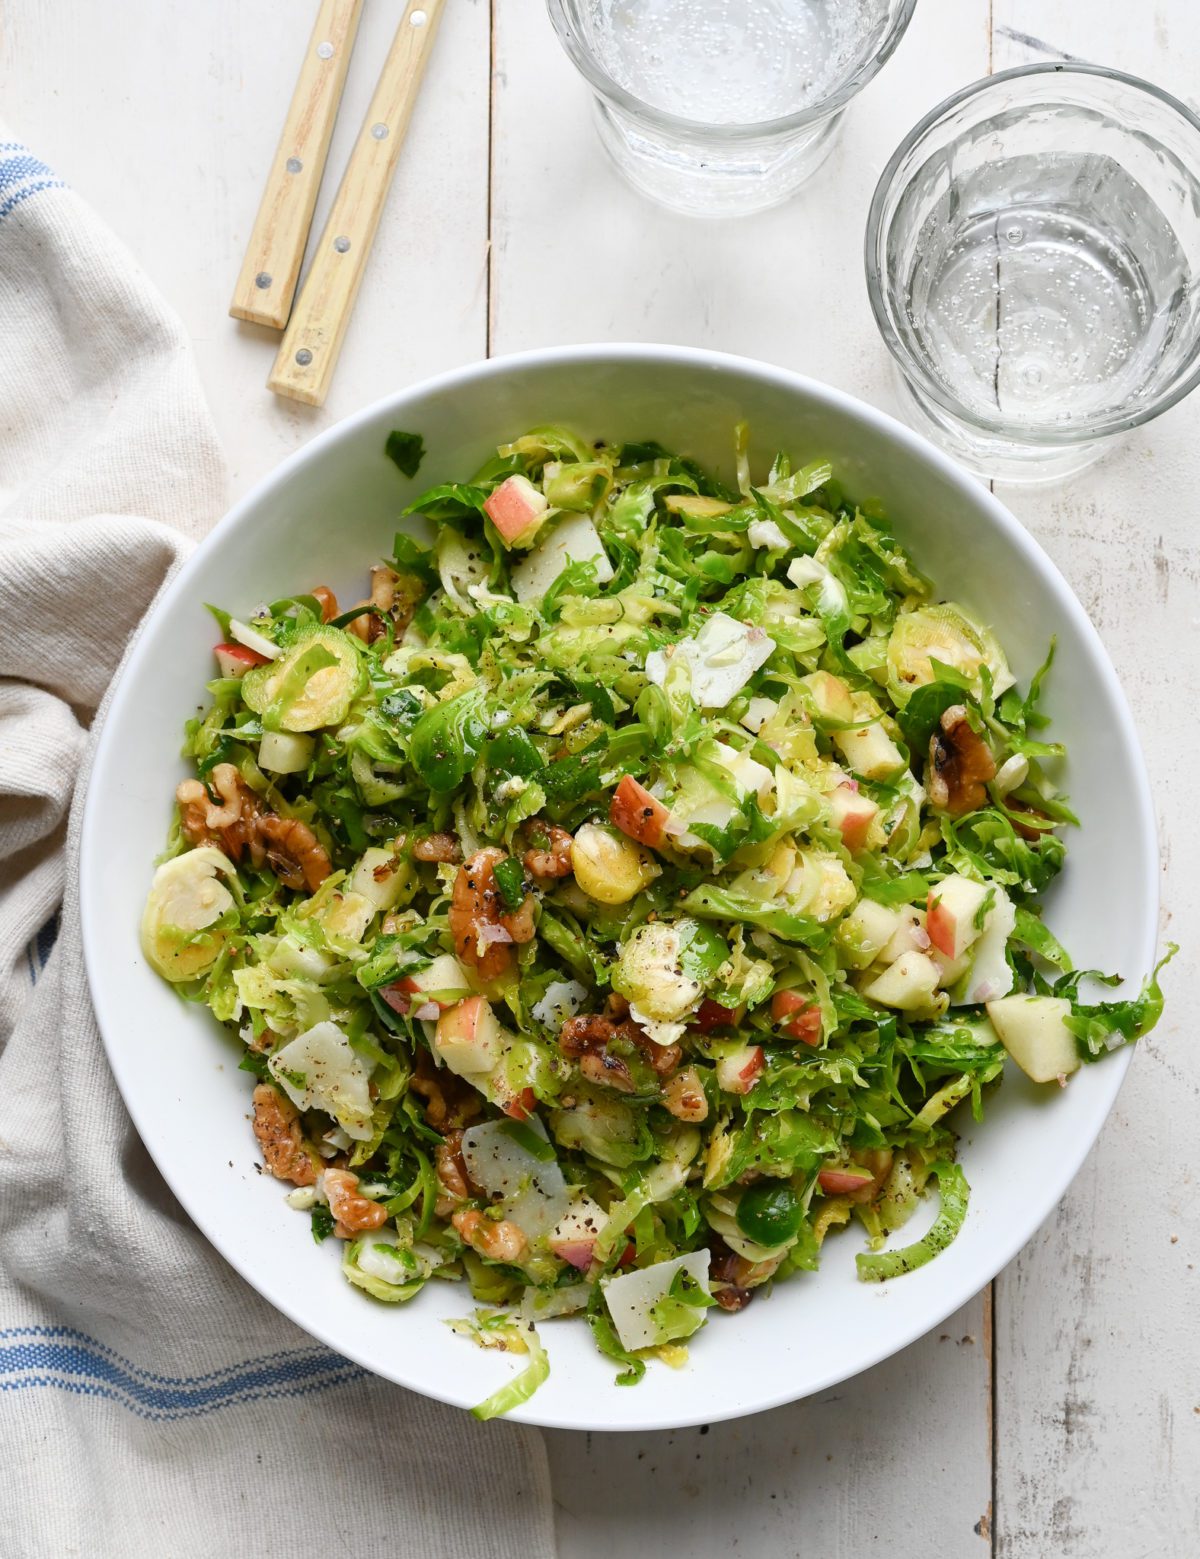 Large bowl of brussels sprout salad.